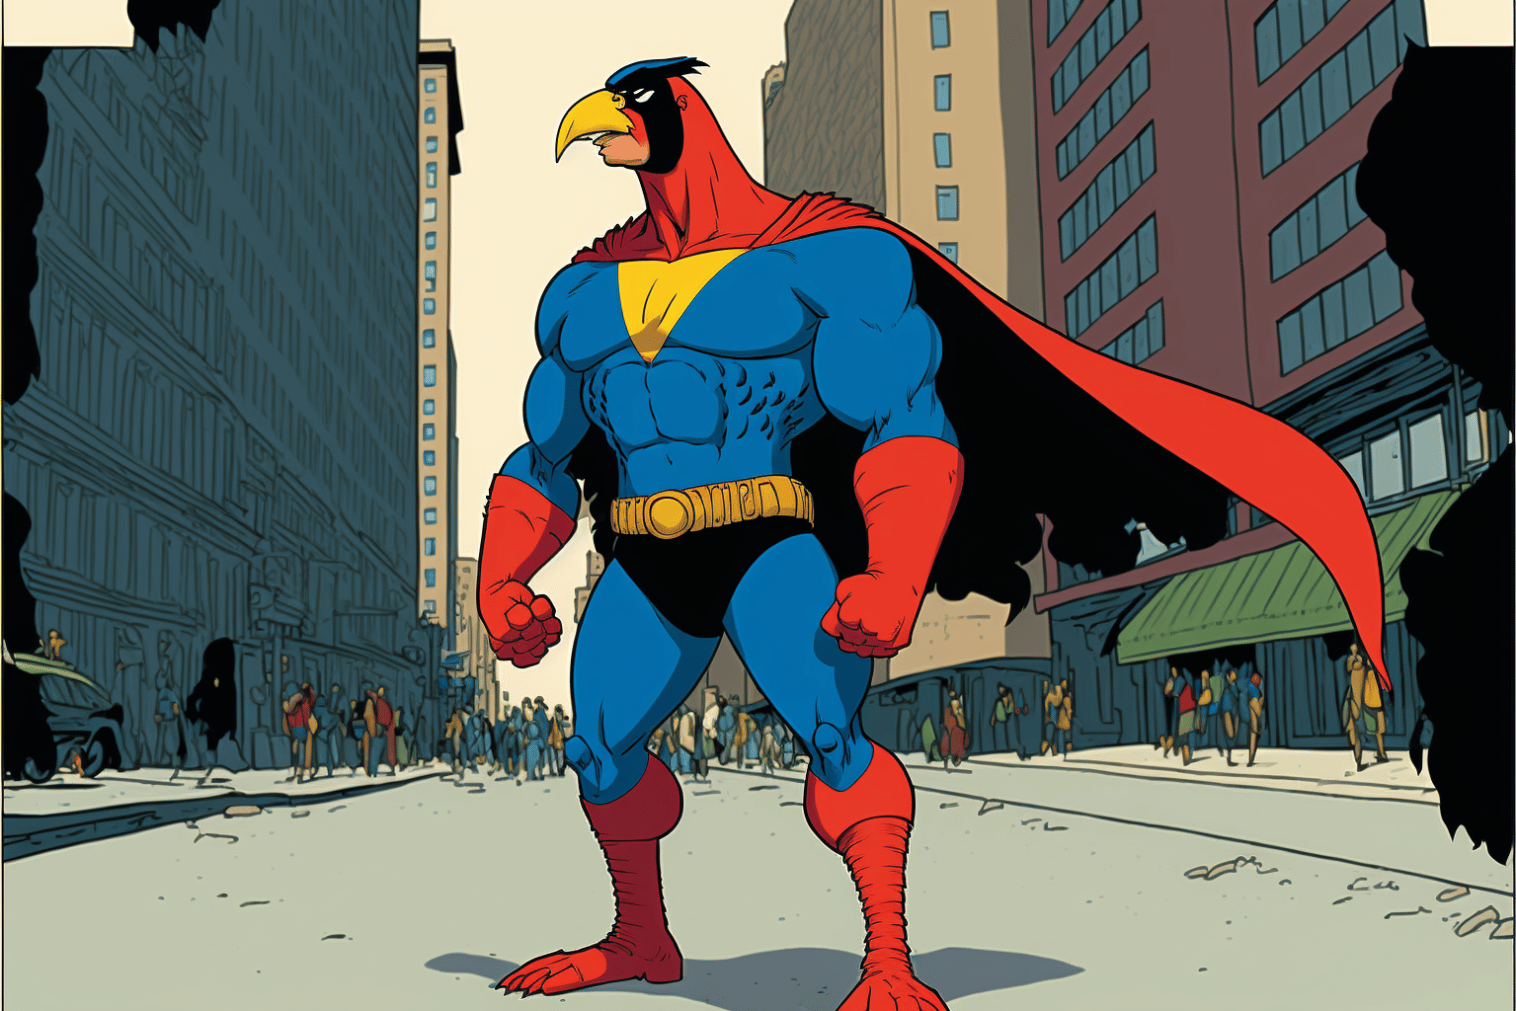 tucan-wearing-a-red-cape-doing-the-superman-pose-on-the-streets-of-a-big-city-graphic-novel